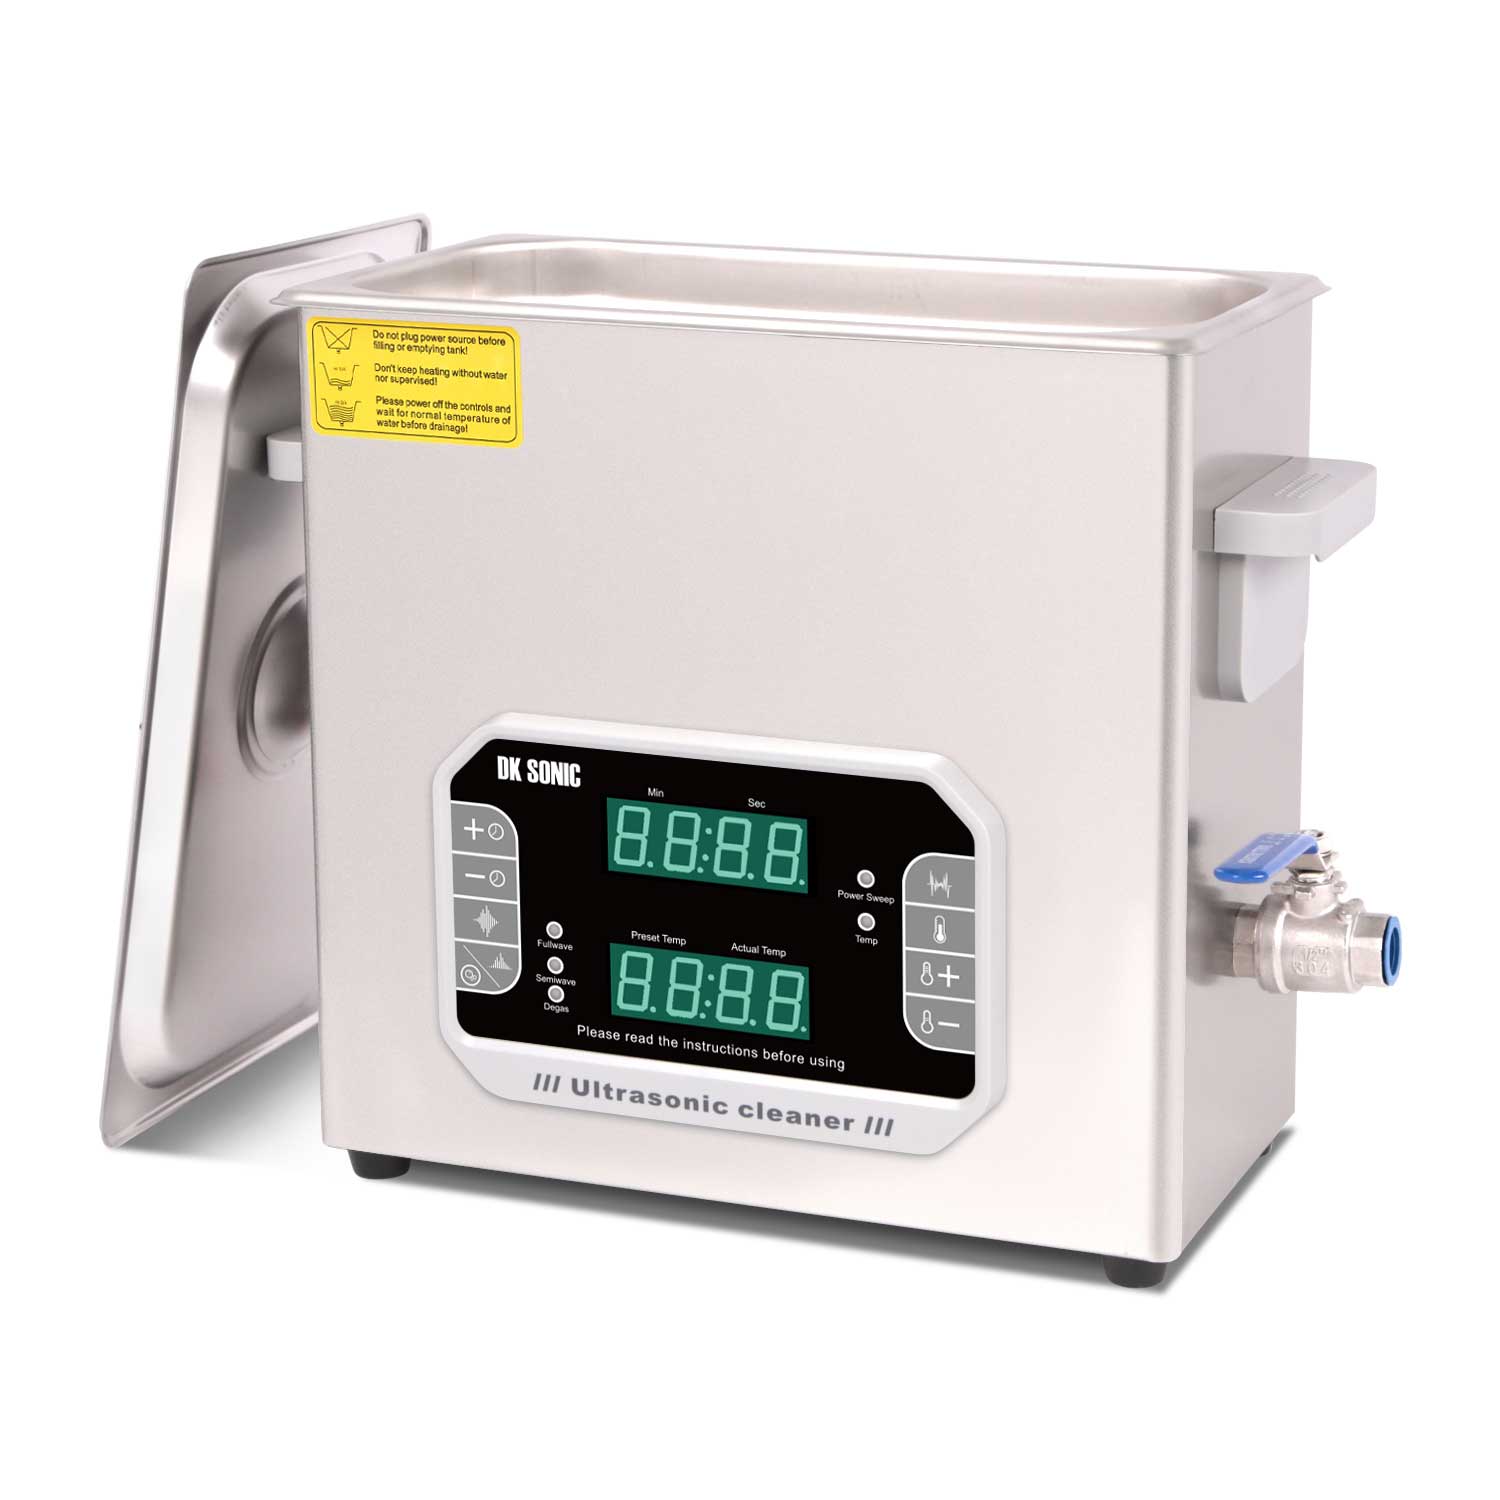 6.5L Touch Control Ultrasonic Cleaner - DK SONIC